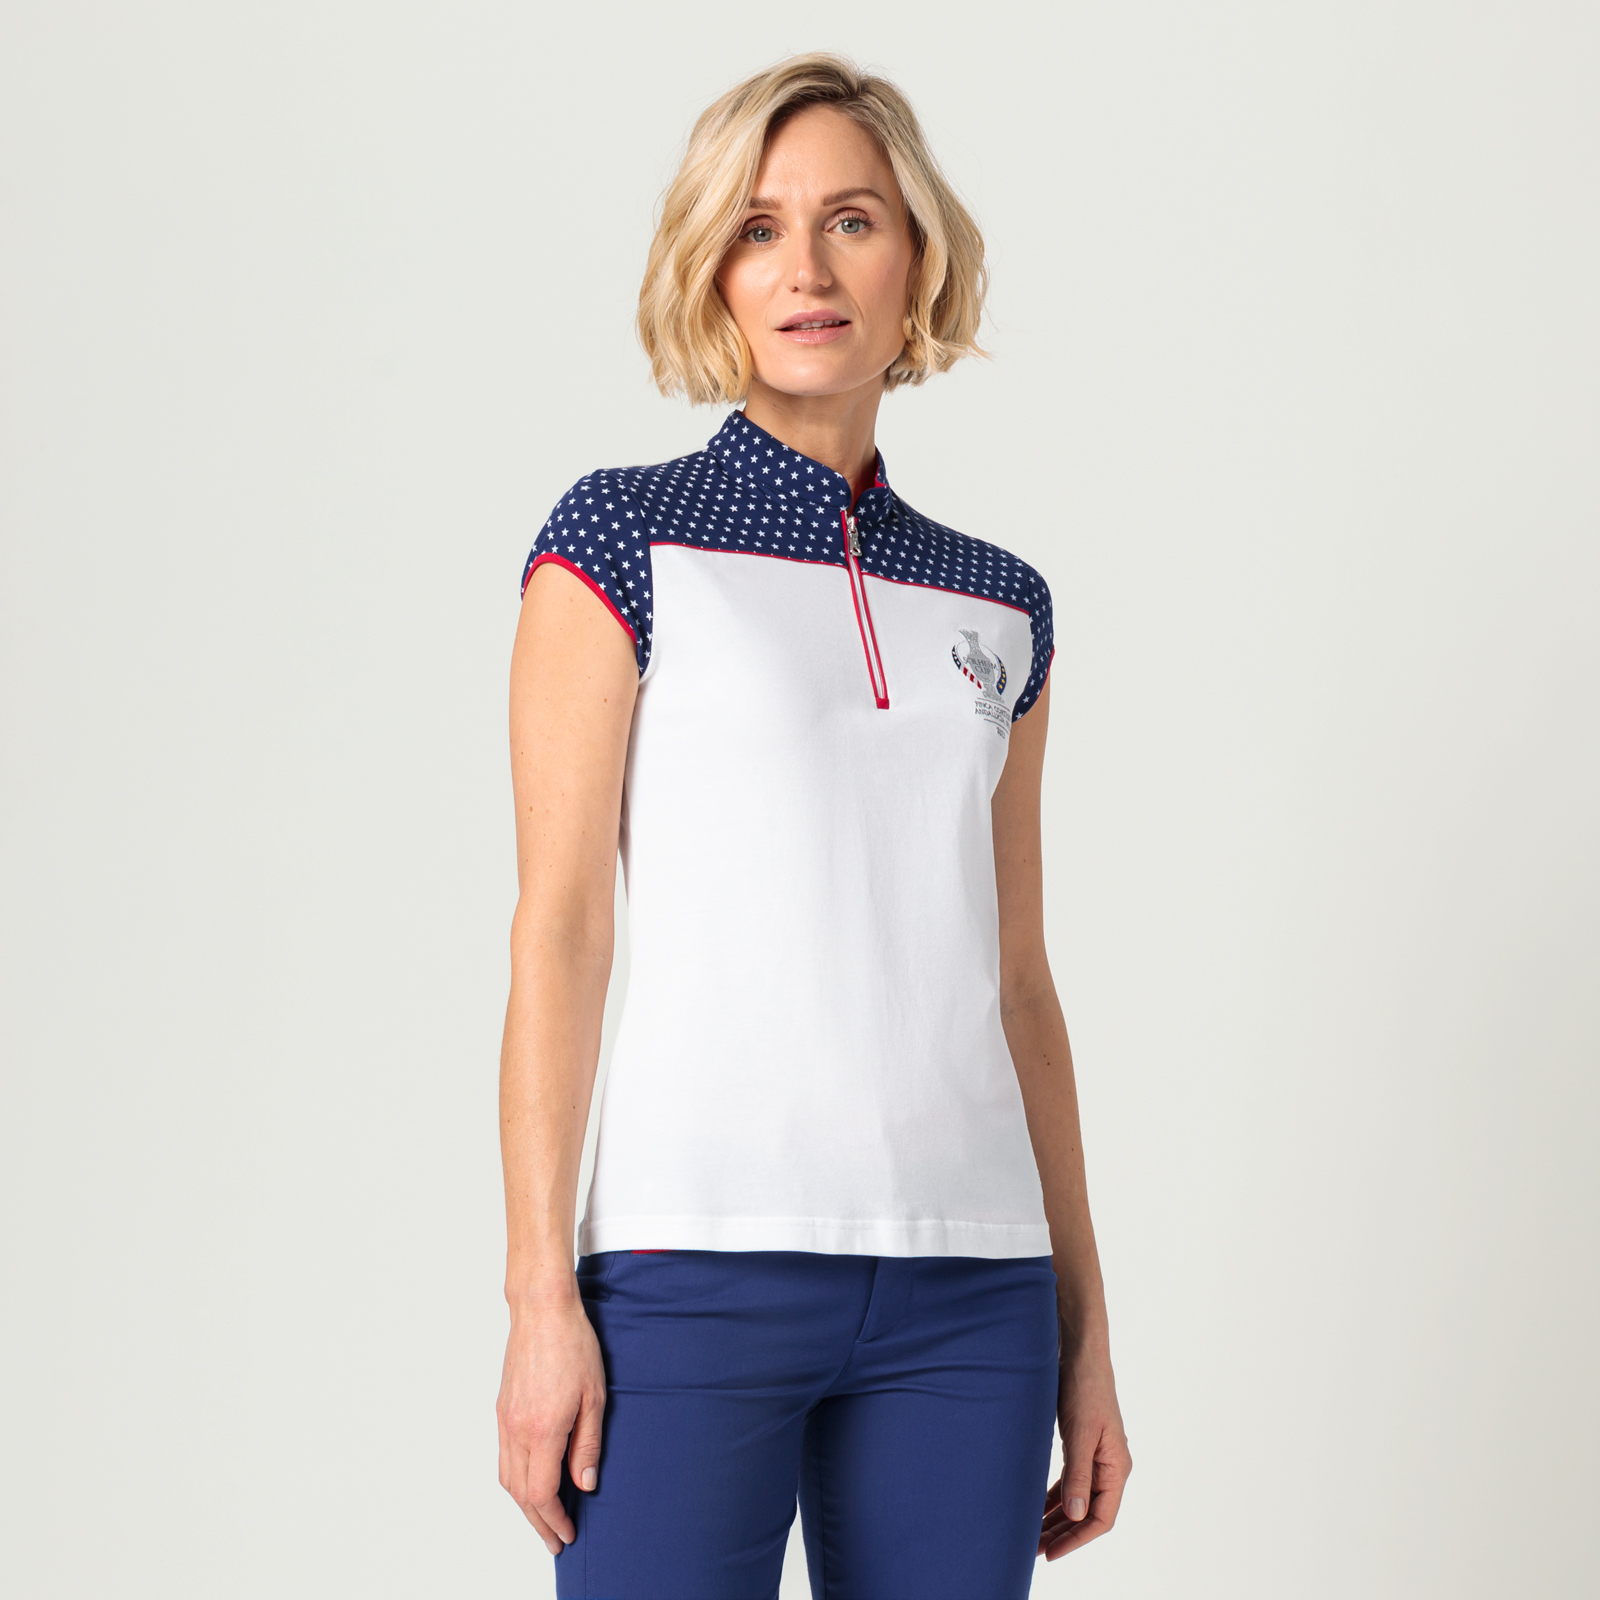 Ladies' golf polo shirt with sun protection in Solheim Cup design 